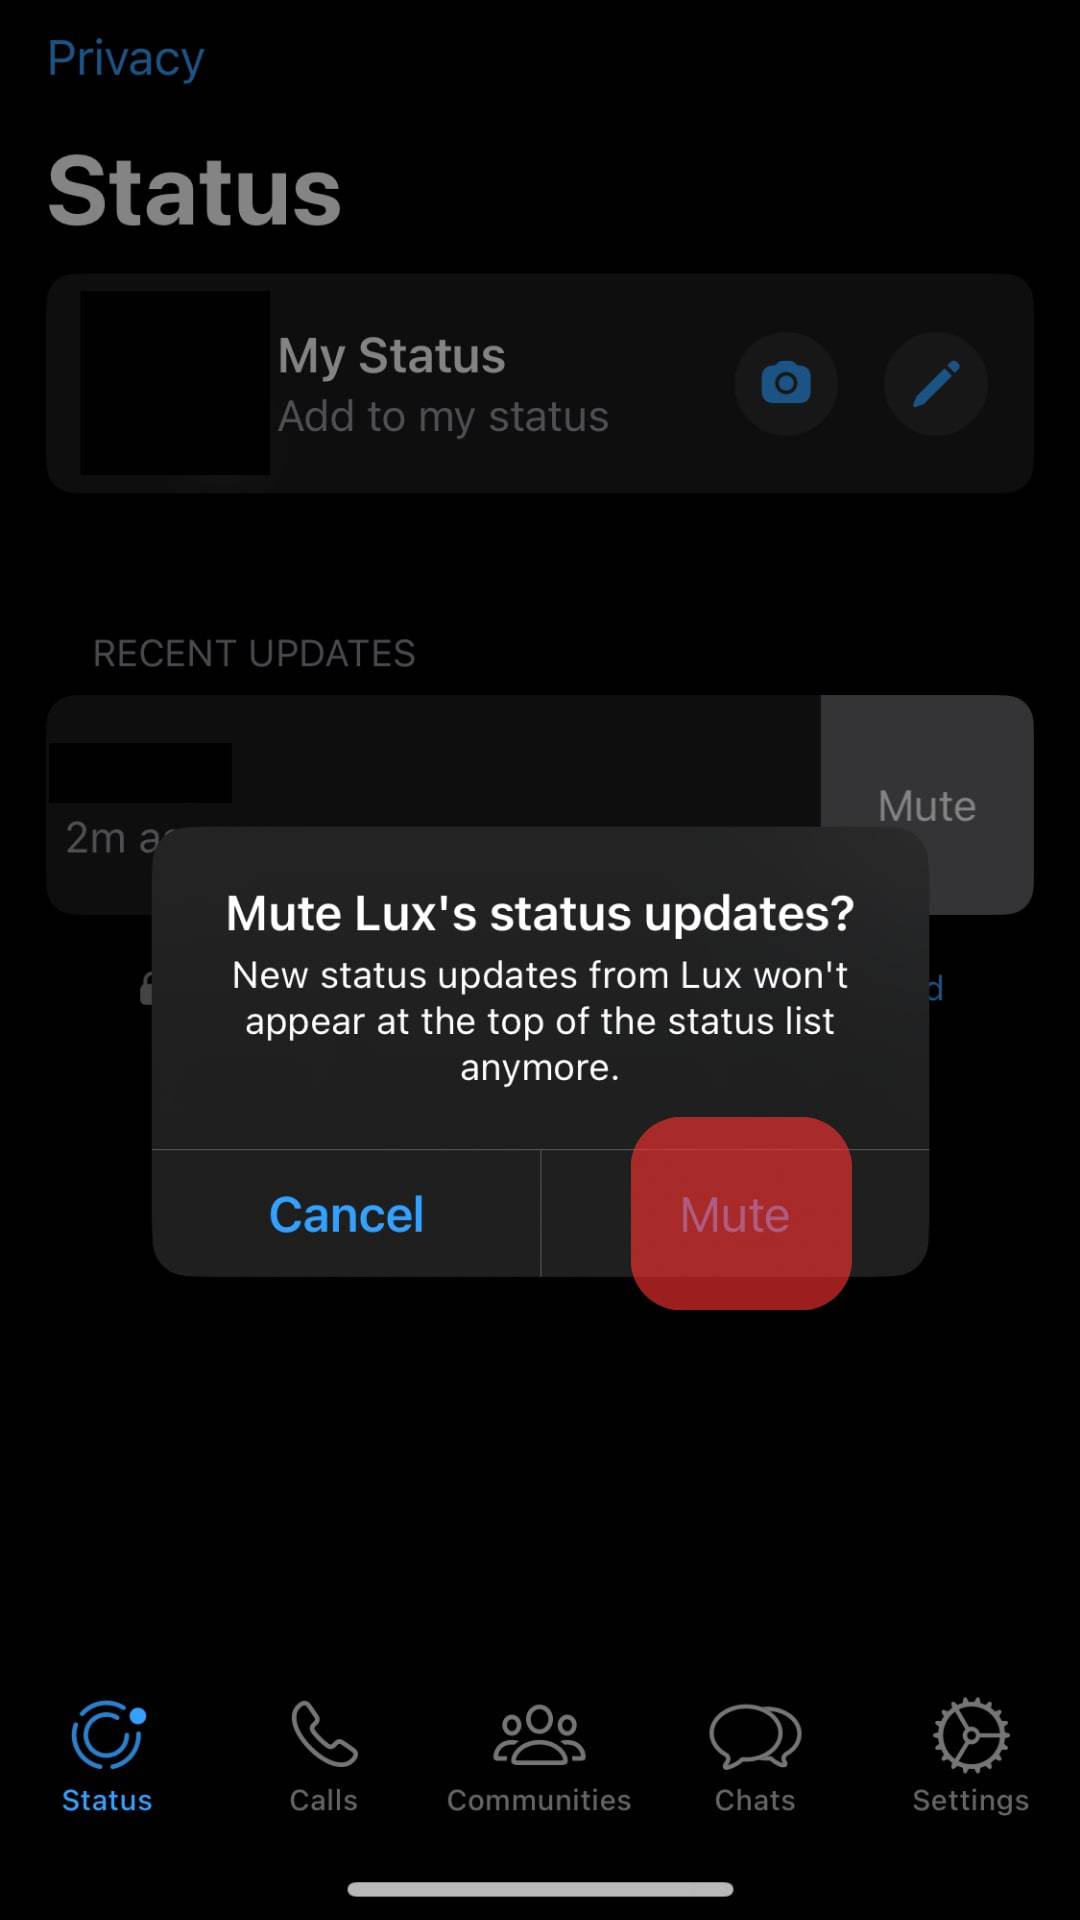 Confirm The Action By Tapping Mute Again.